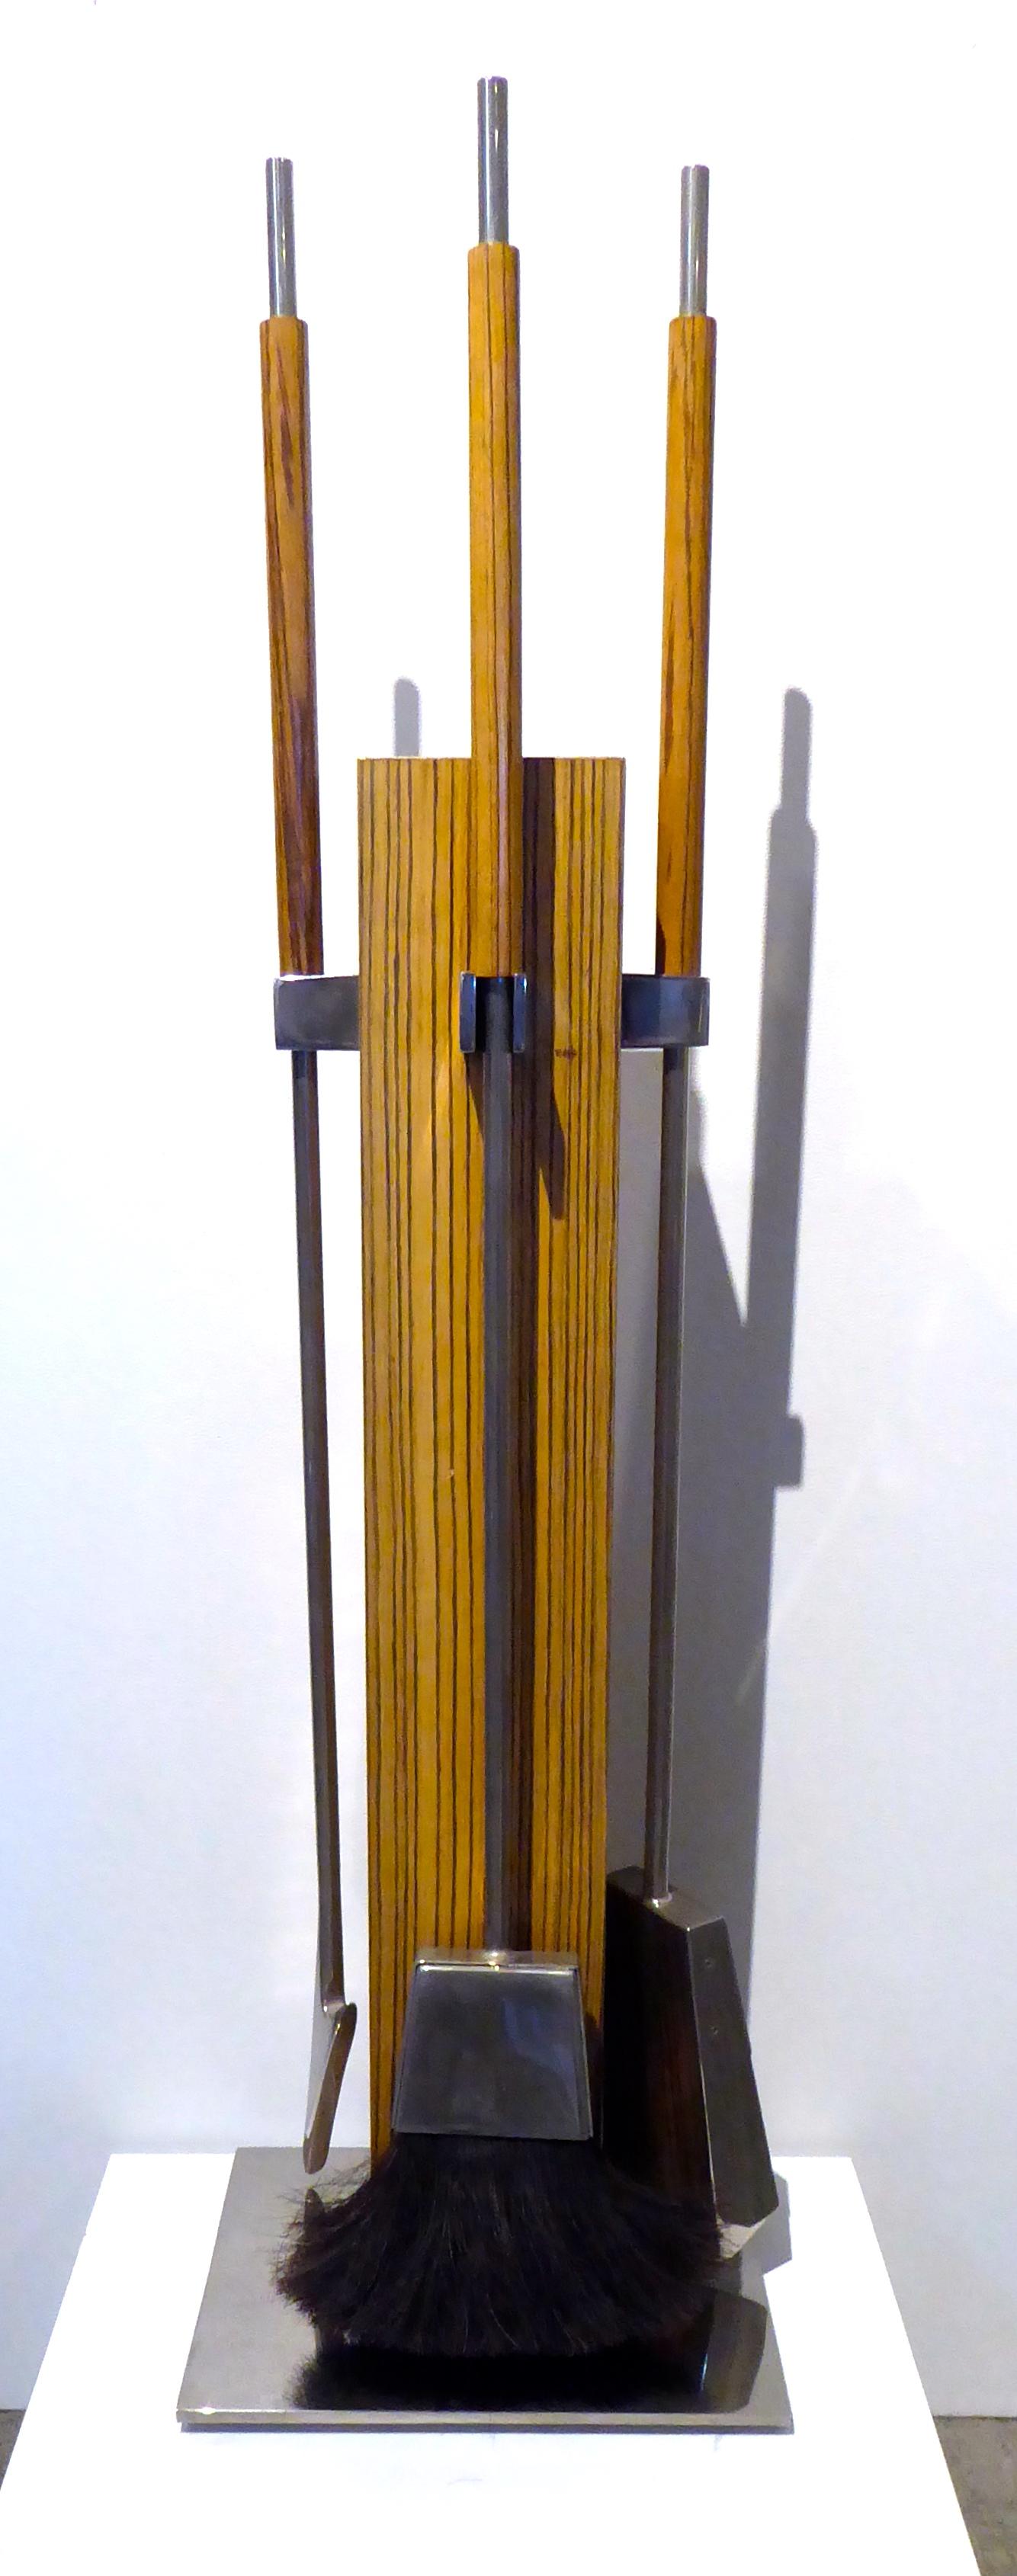 A four-piece zebra wood and chrome-plated steel fire tool set designed by Allessandro Albrizzi in the 1970s. These sets are generally seen in Lucite but the zebra wood was an available option.